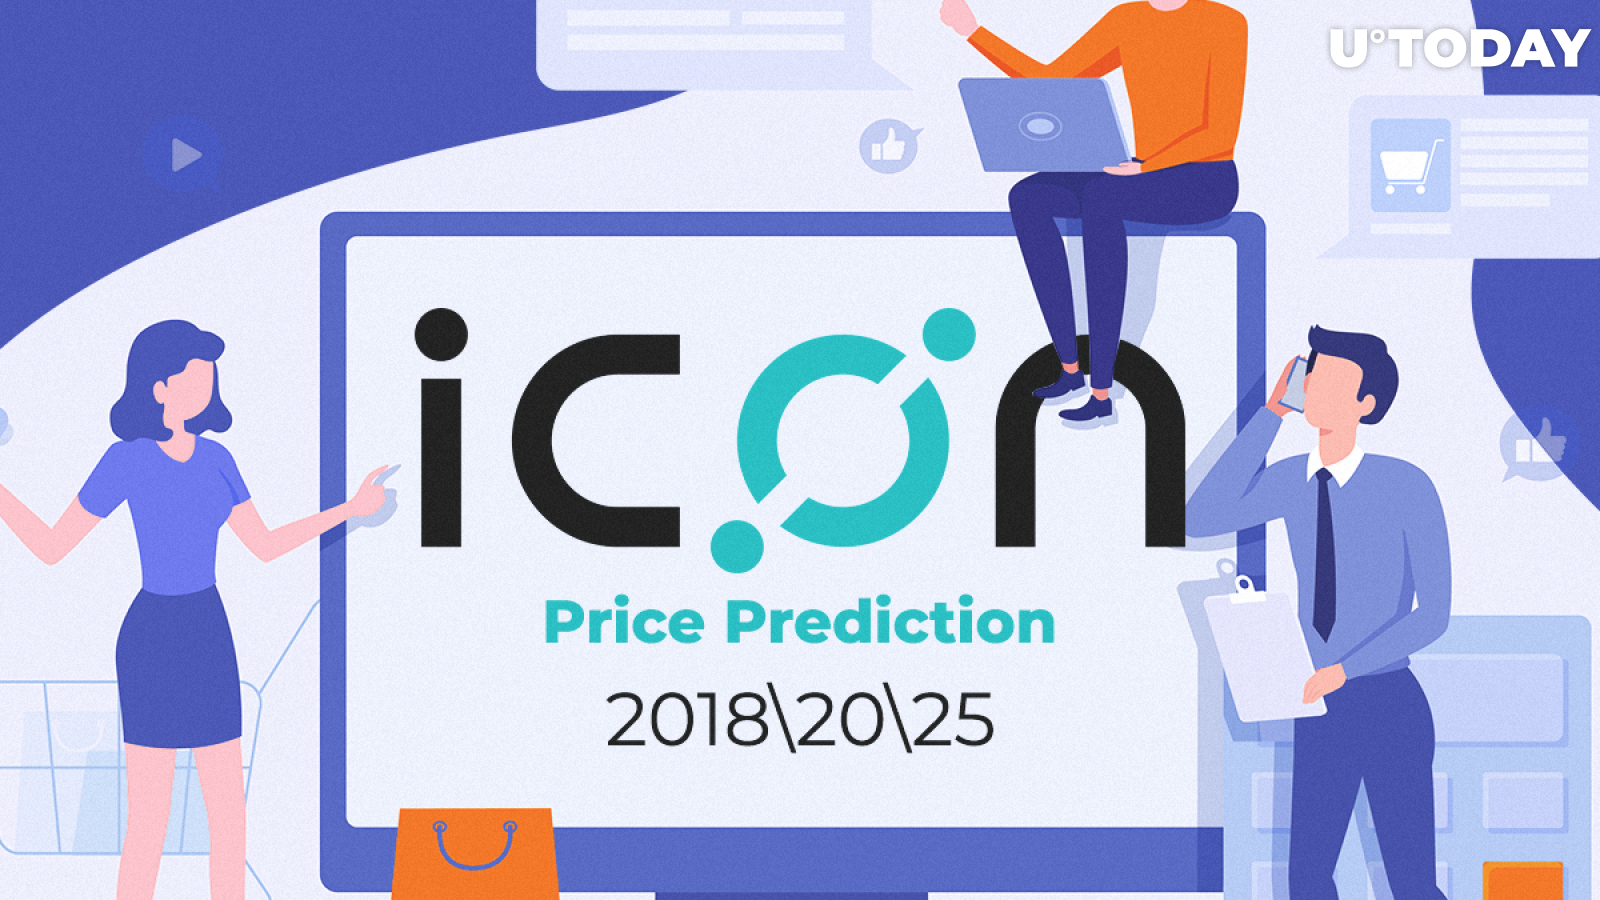 ICON Price Prediction: How Much Will ICX Cost in 2018\20\25?